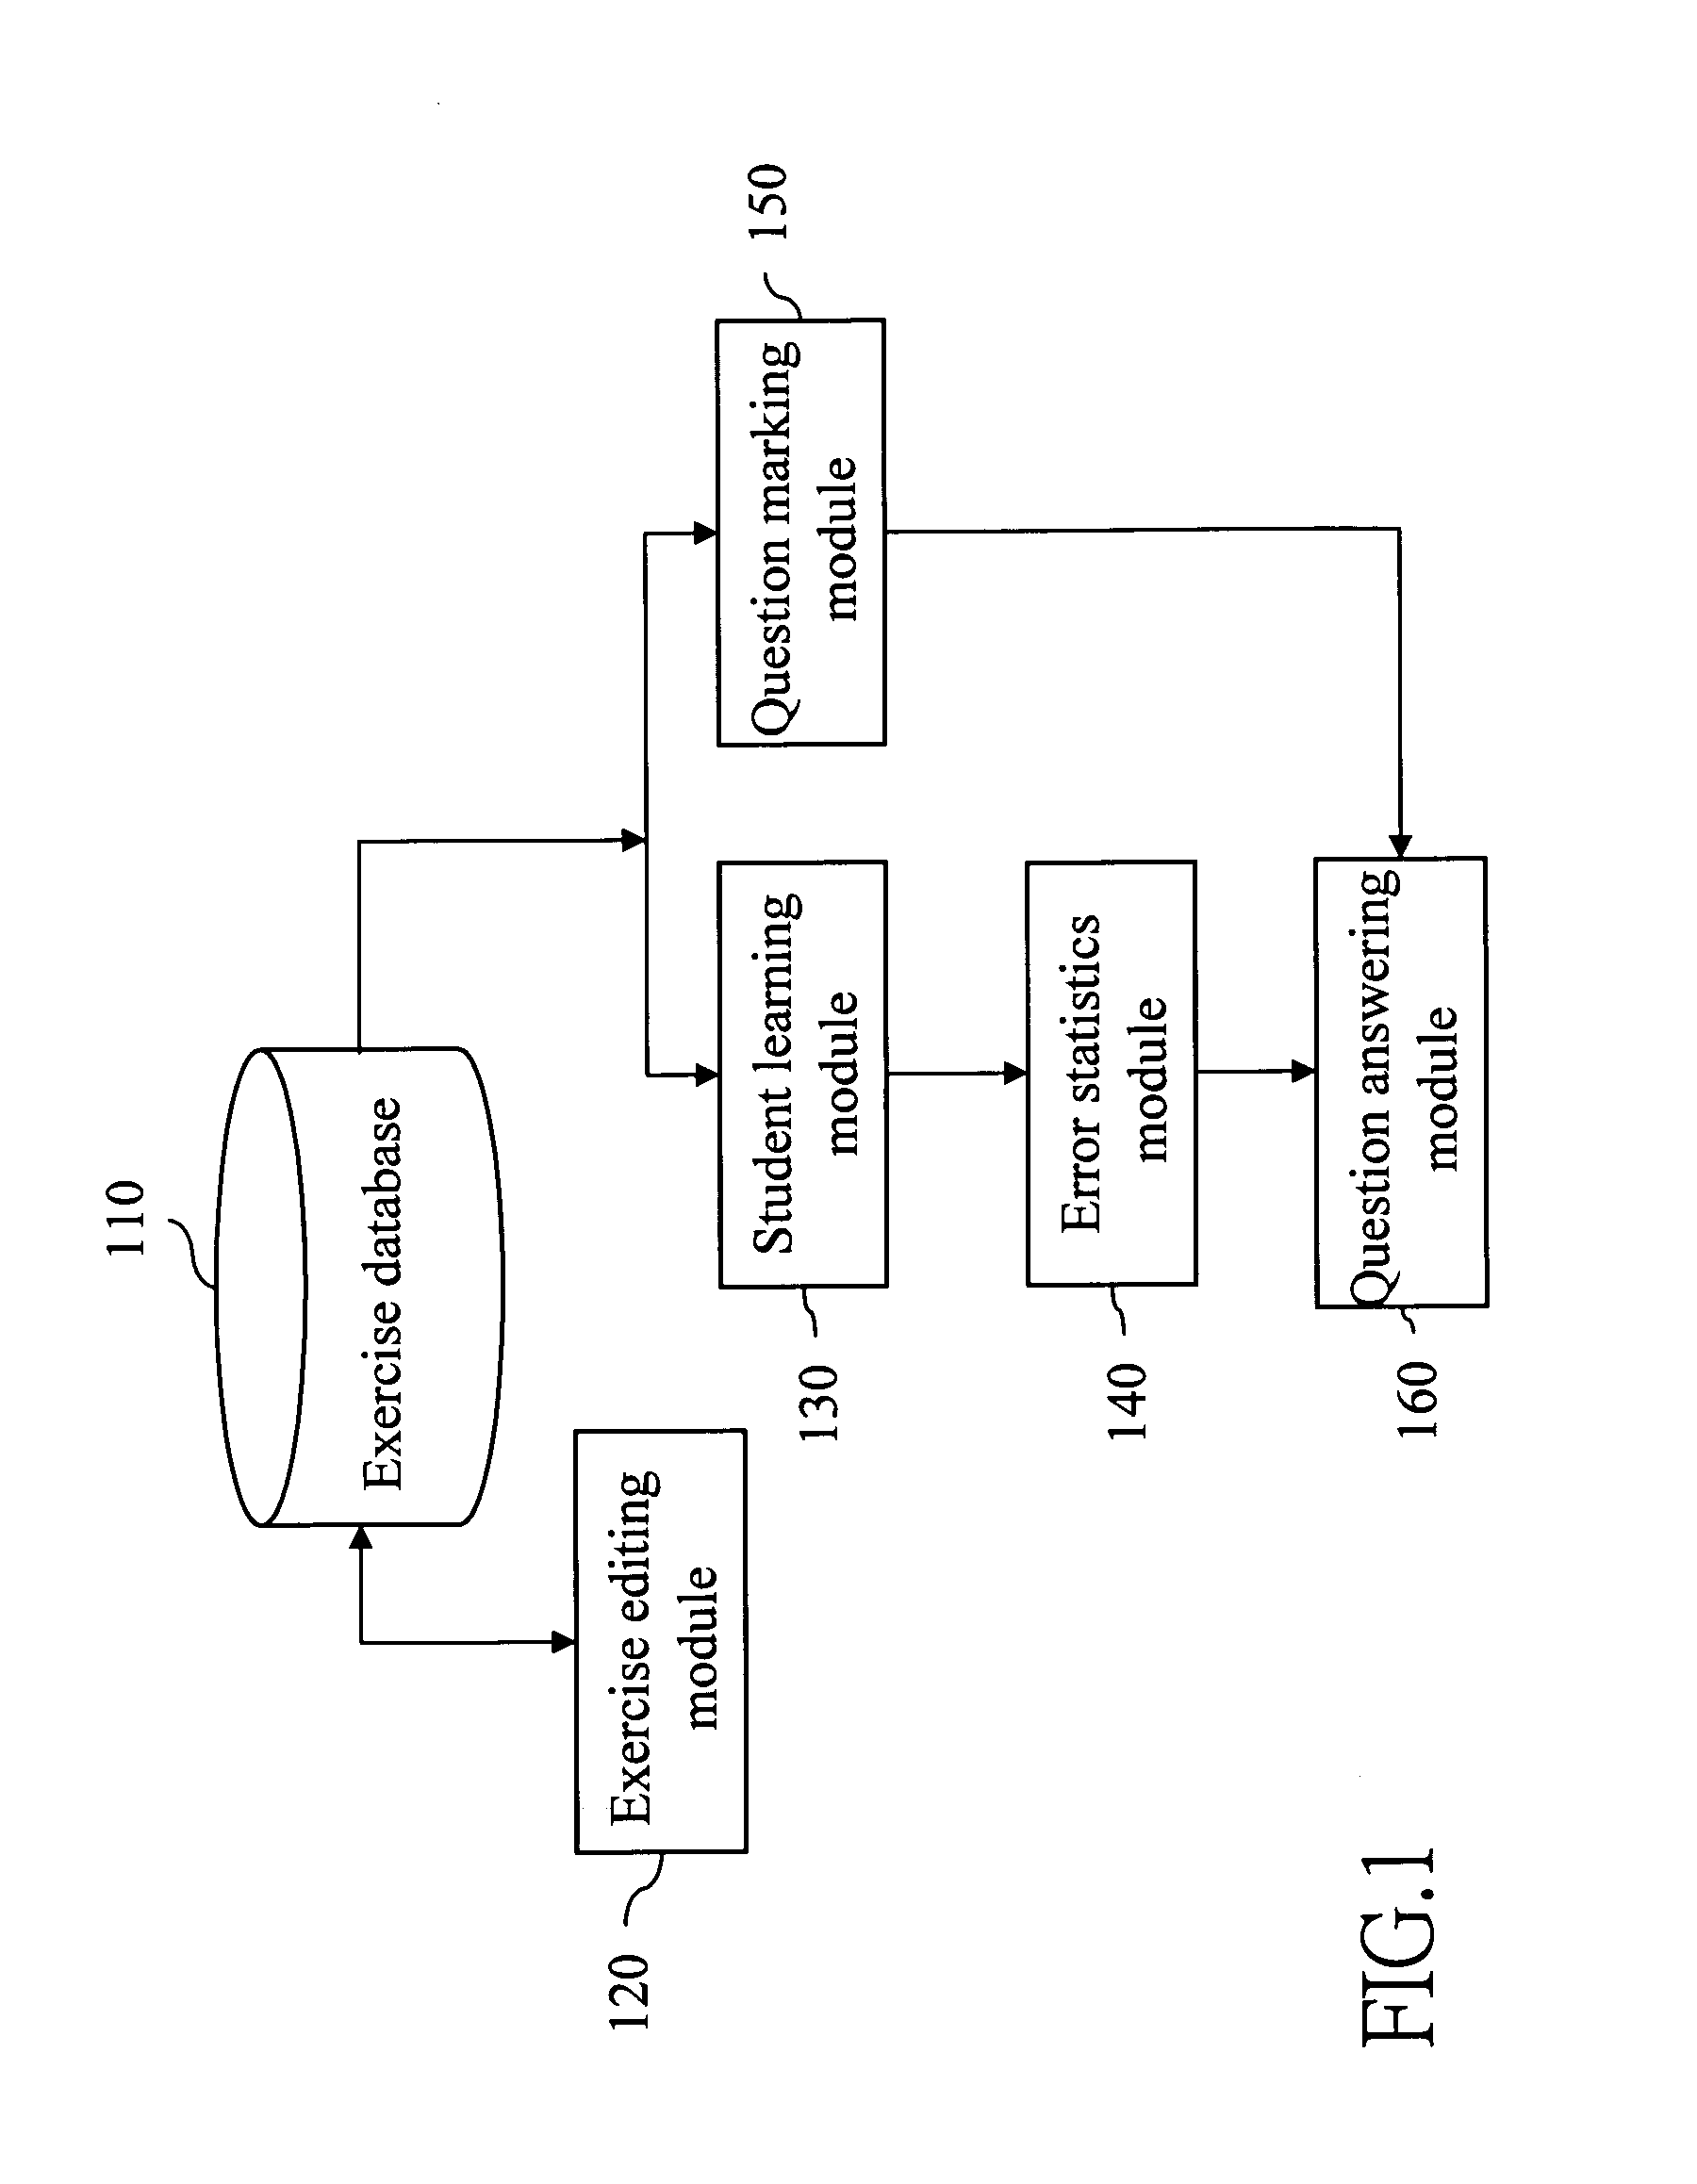 Remote instruction system and method